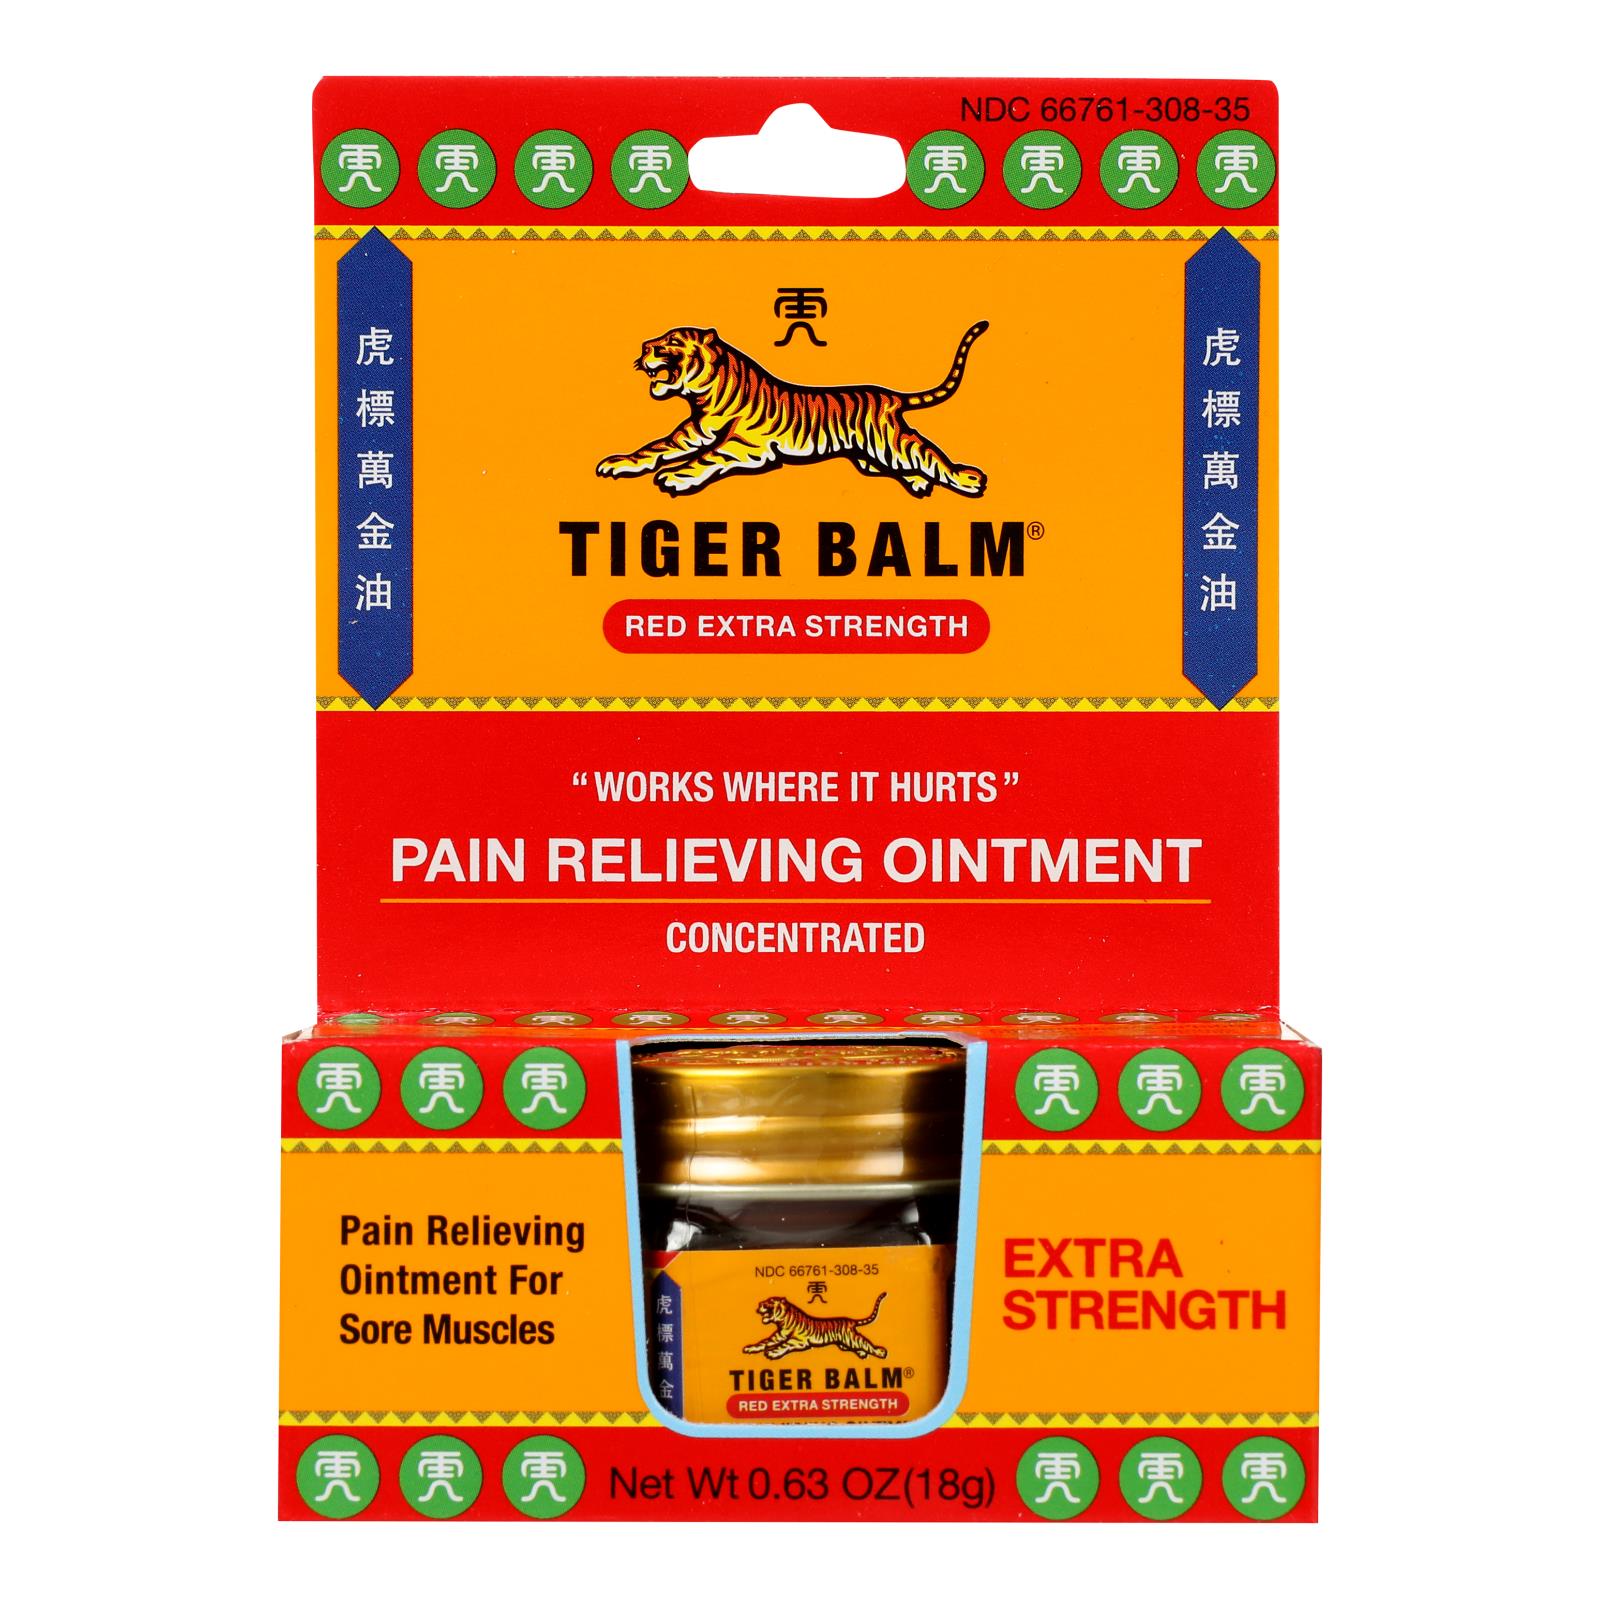 Tiger Balm Extra Strength Pain Relieving Ointment - 0.63 Oz - Case Of 6